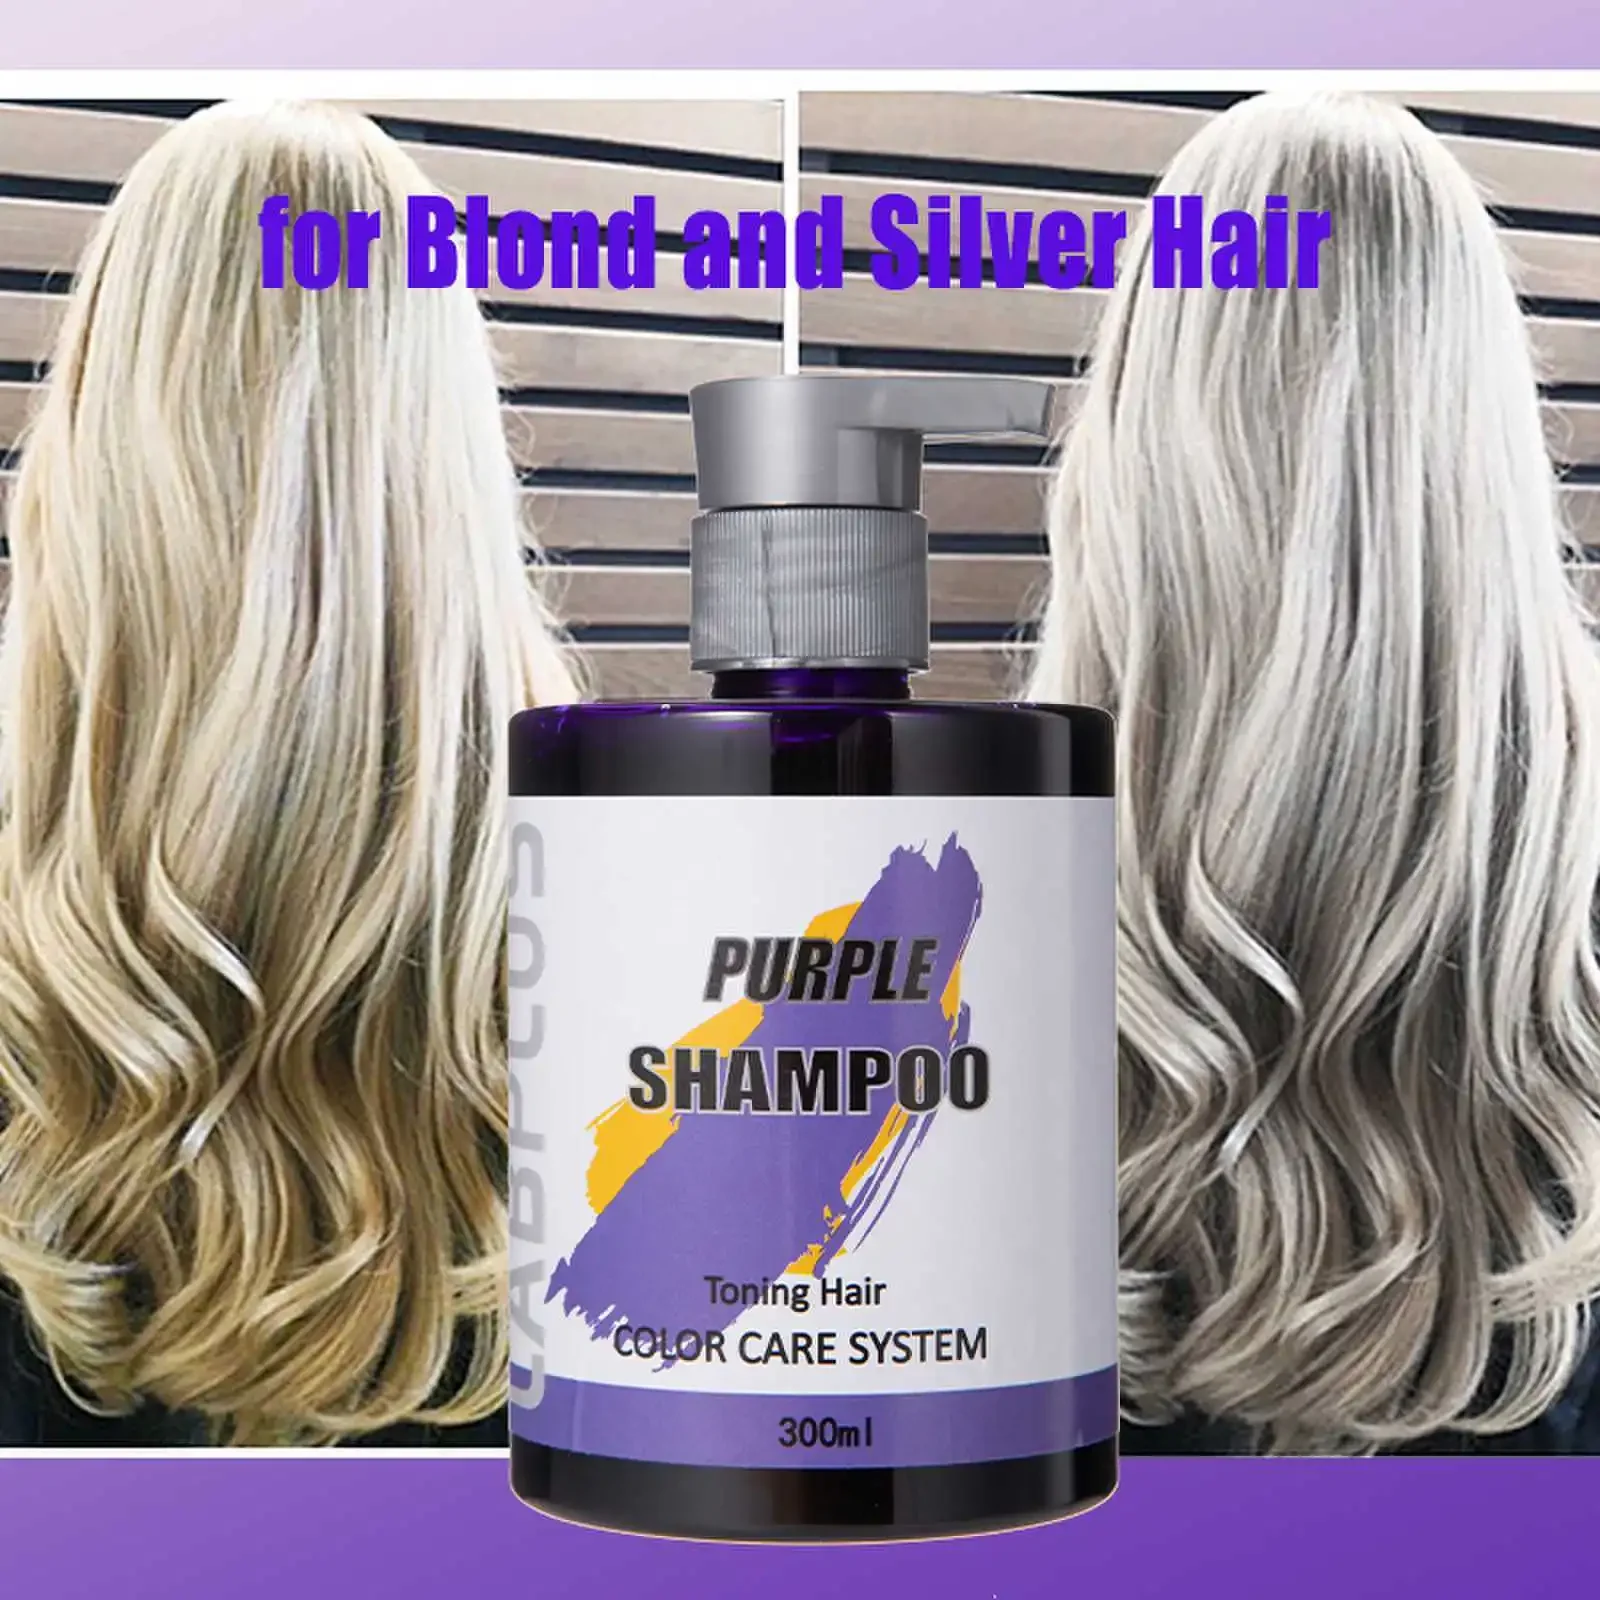 Blonde Hair Shampoos Remove Yellow Professional Blonde Bleached Highlighted Shampoo Revitalize Effective Purple Shampoo 220v led strip red yellow blue green white warm white pink ice blue highlighted high quality lamp bar 60leds m